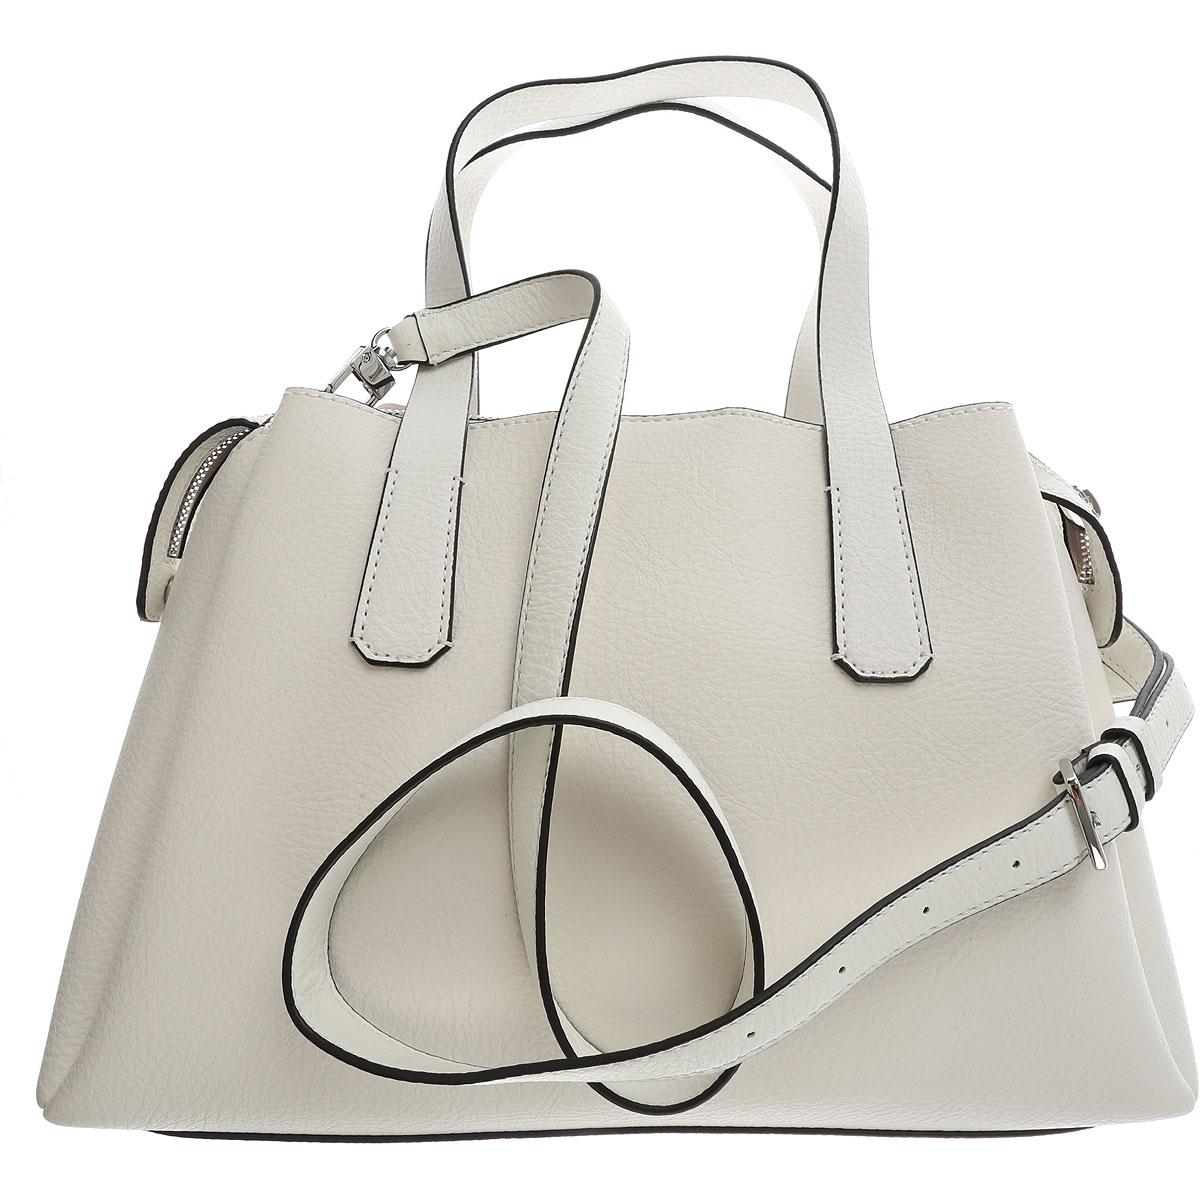 Guess Tote Bag On Sale in White - Lyst